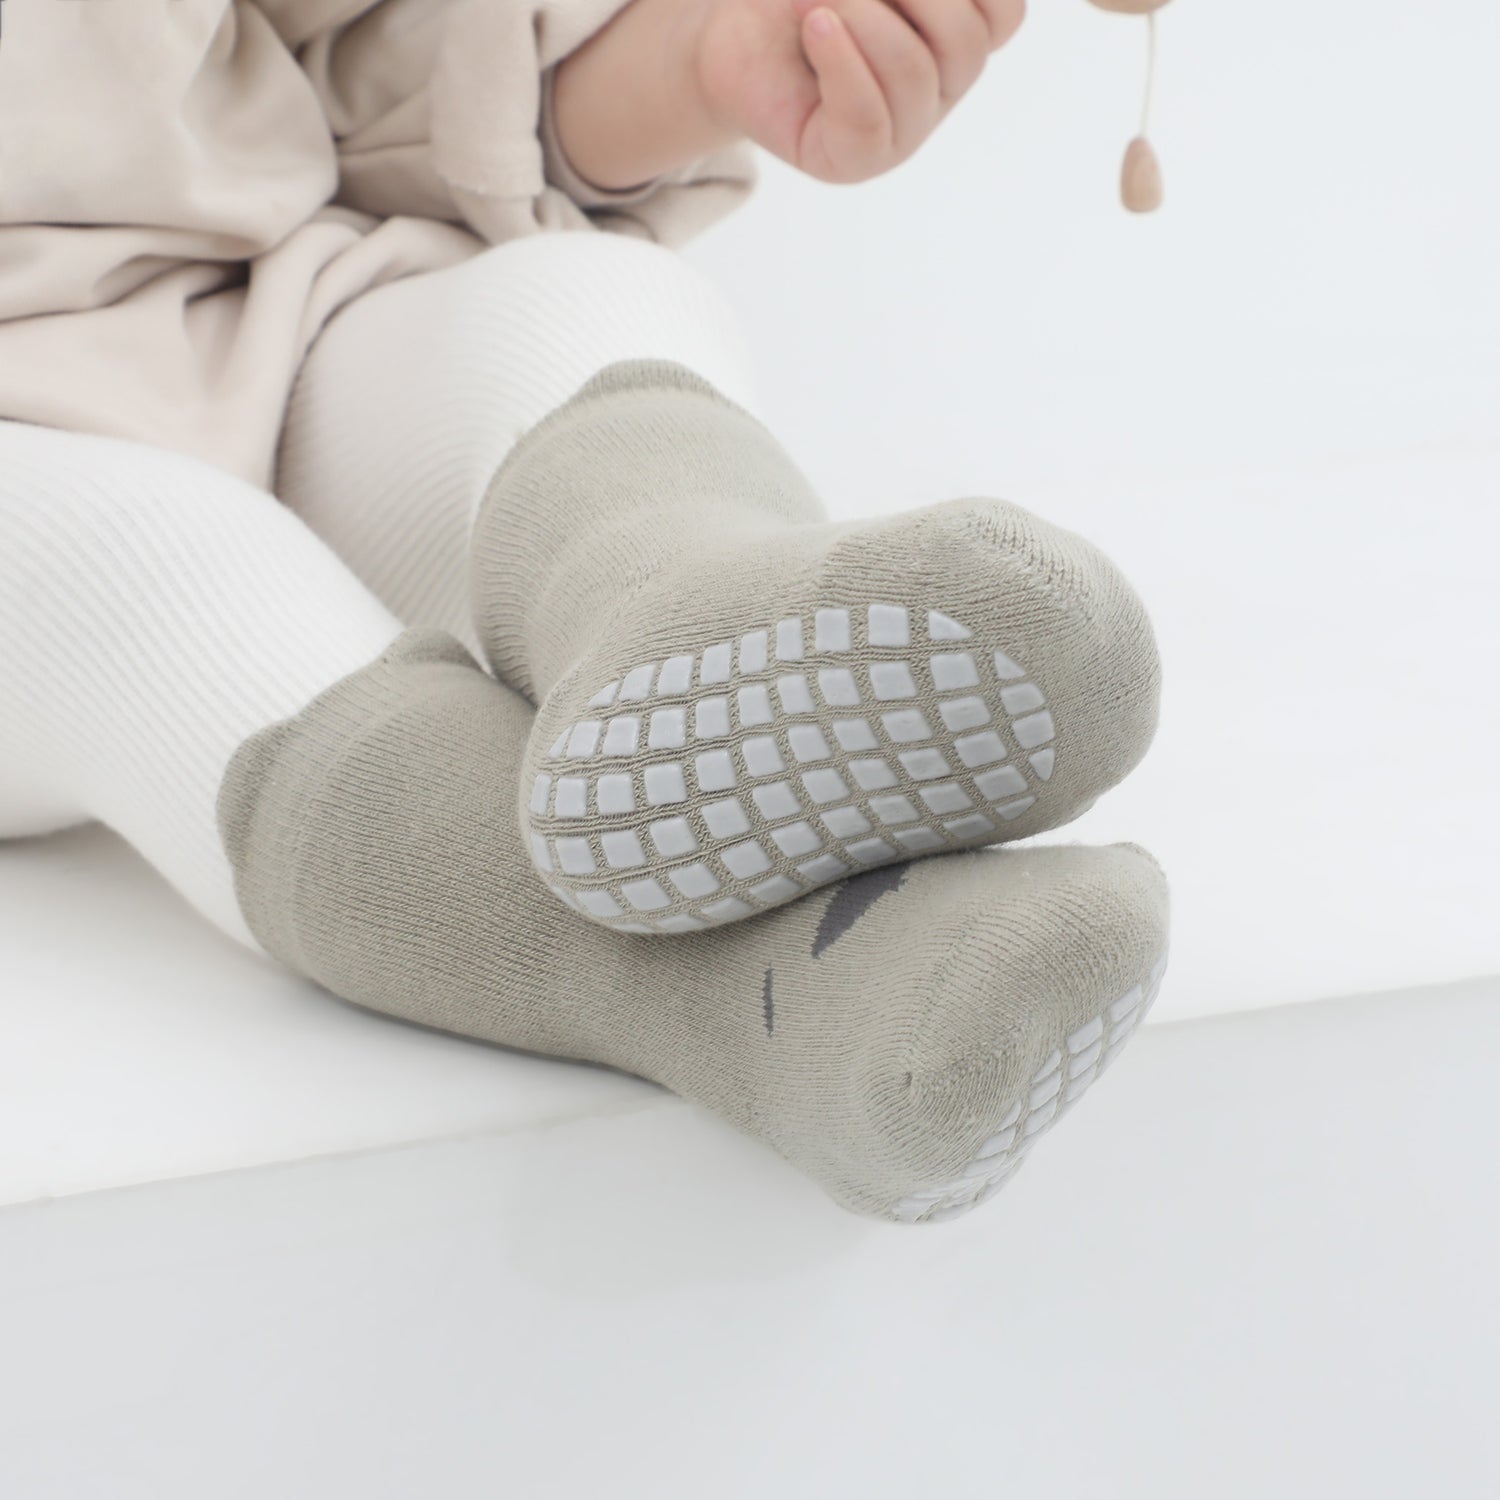 Infant grip socks blending safety with fun, designed for a sleek, minimalist look.